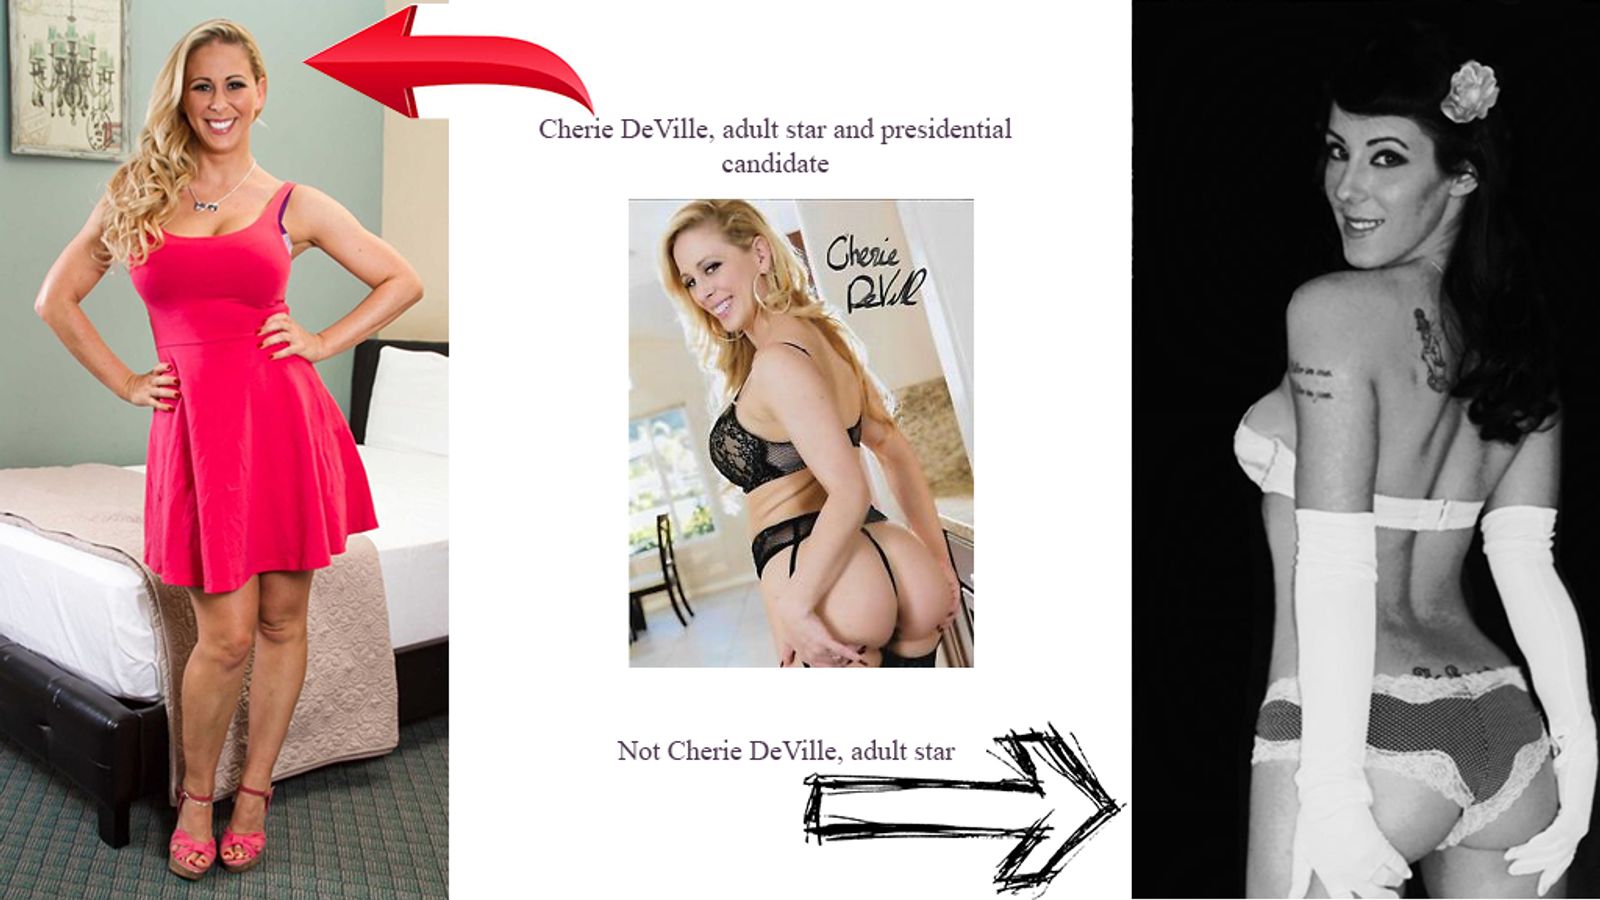 Winger Tabloid Takes Cherie DeVille's Pres. Candidacy Seriously